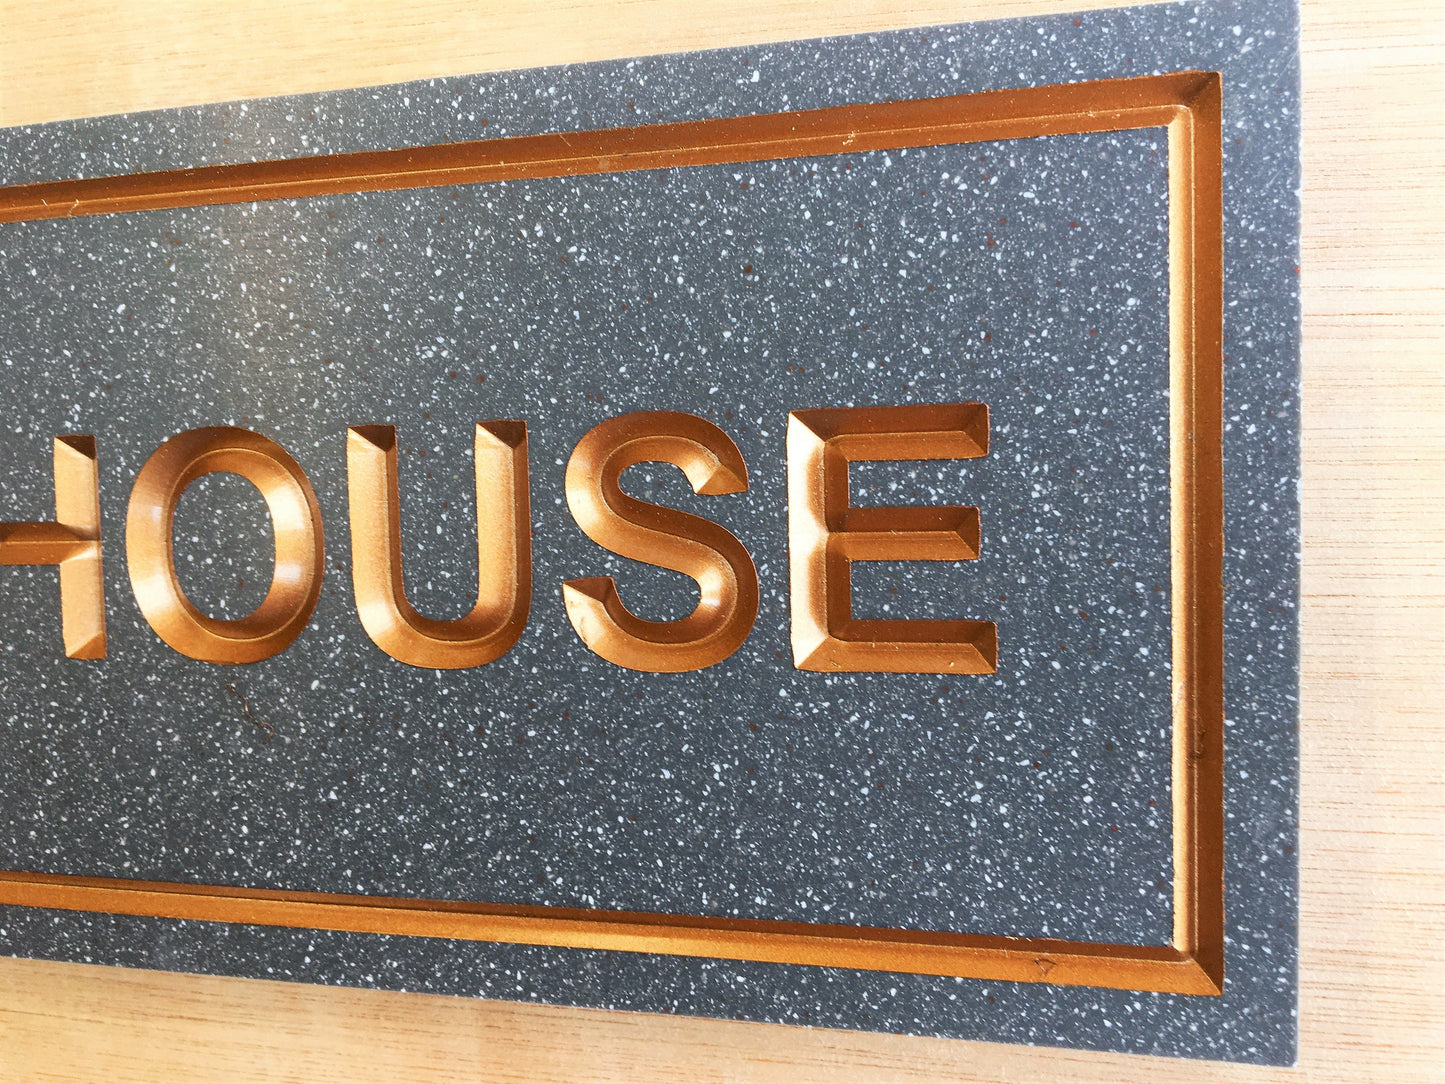 House sign-Engrave Stone like Corian house sign - Custom Made -300mm x 100mm x 12mm - Personalisd - COUNTY HOUSE SIGNS